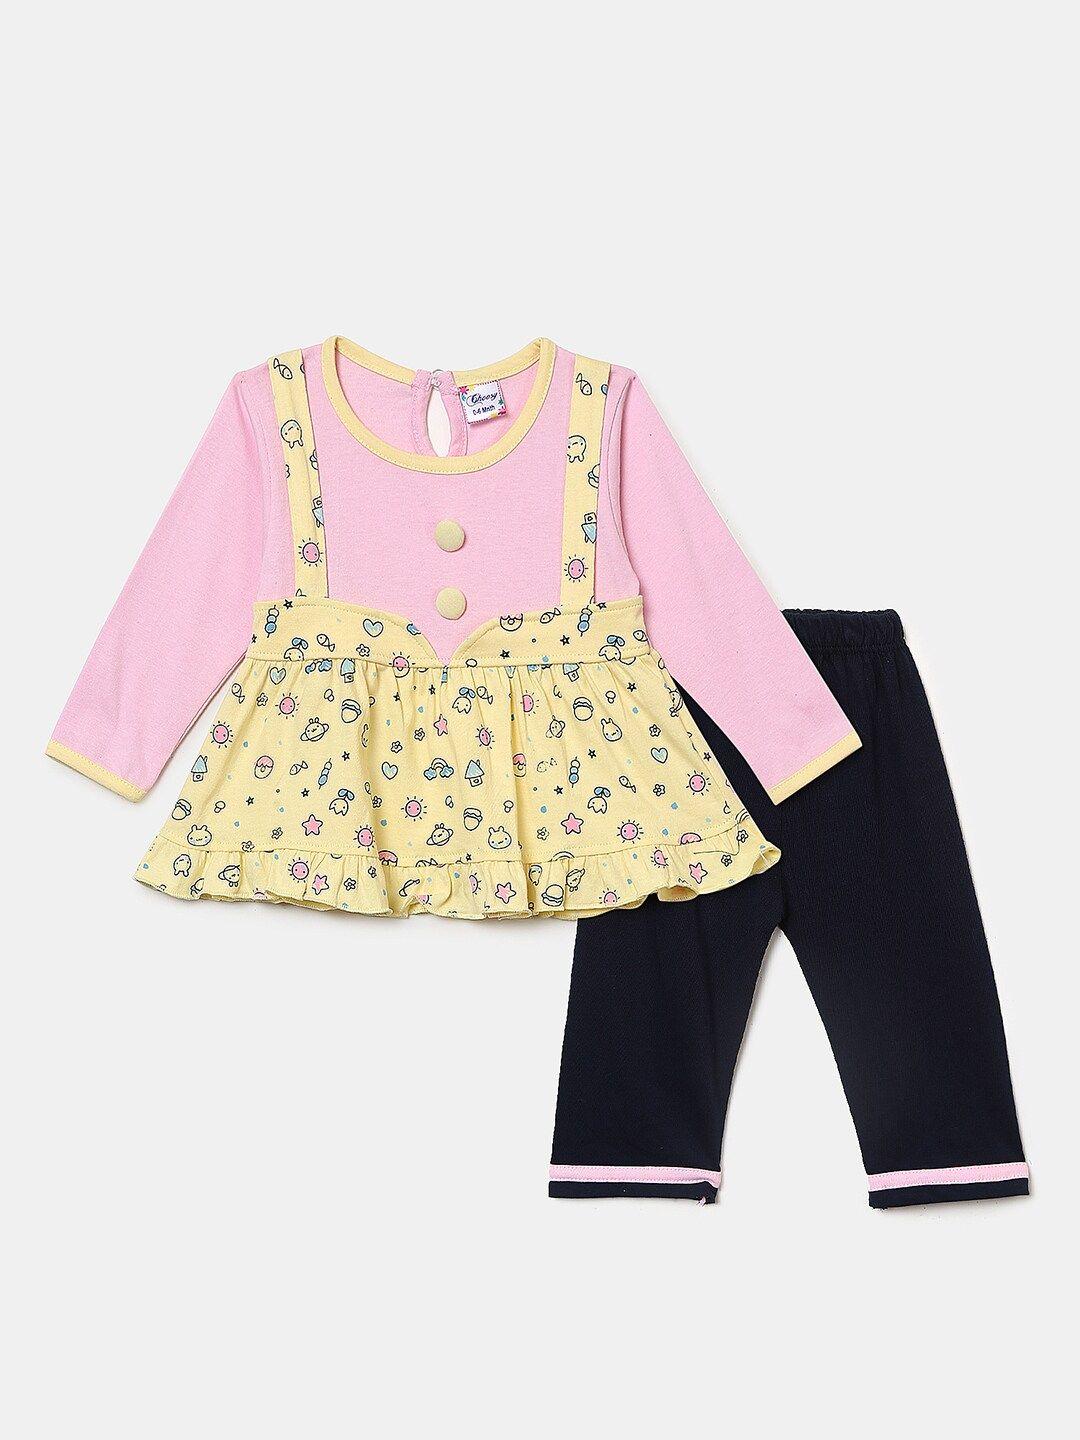 v-mart-girls-yellow-&-pink-printed-pure-cotton-top-with-pyjamas